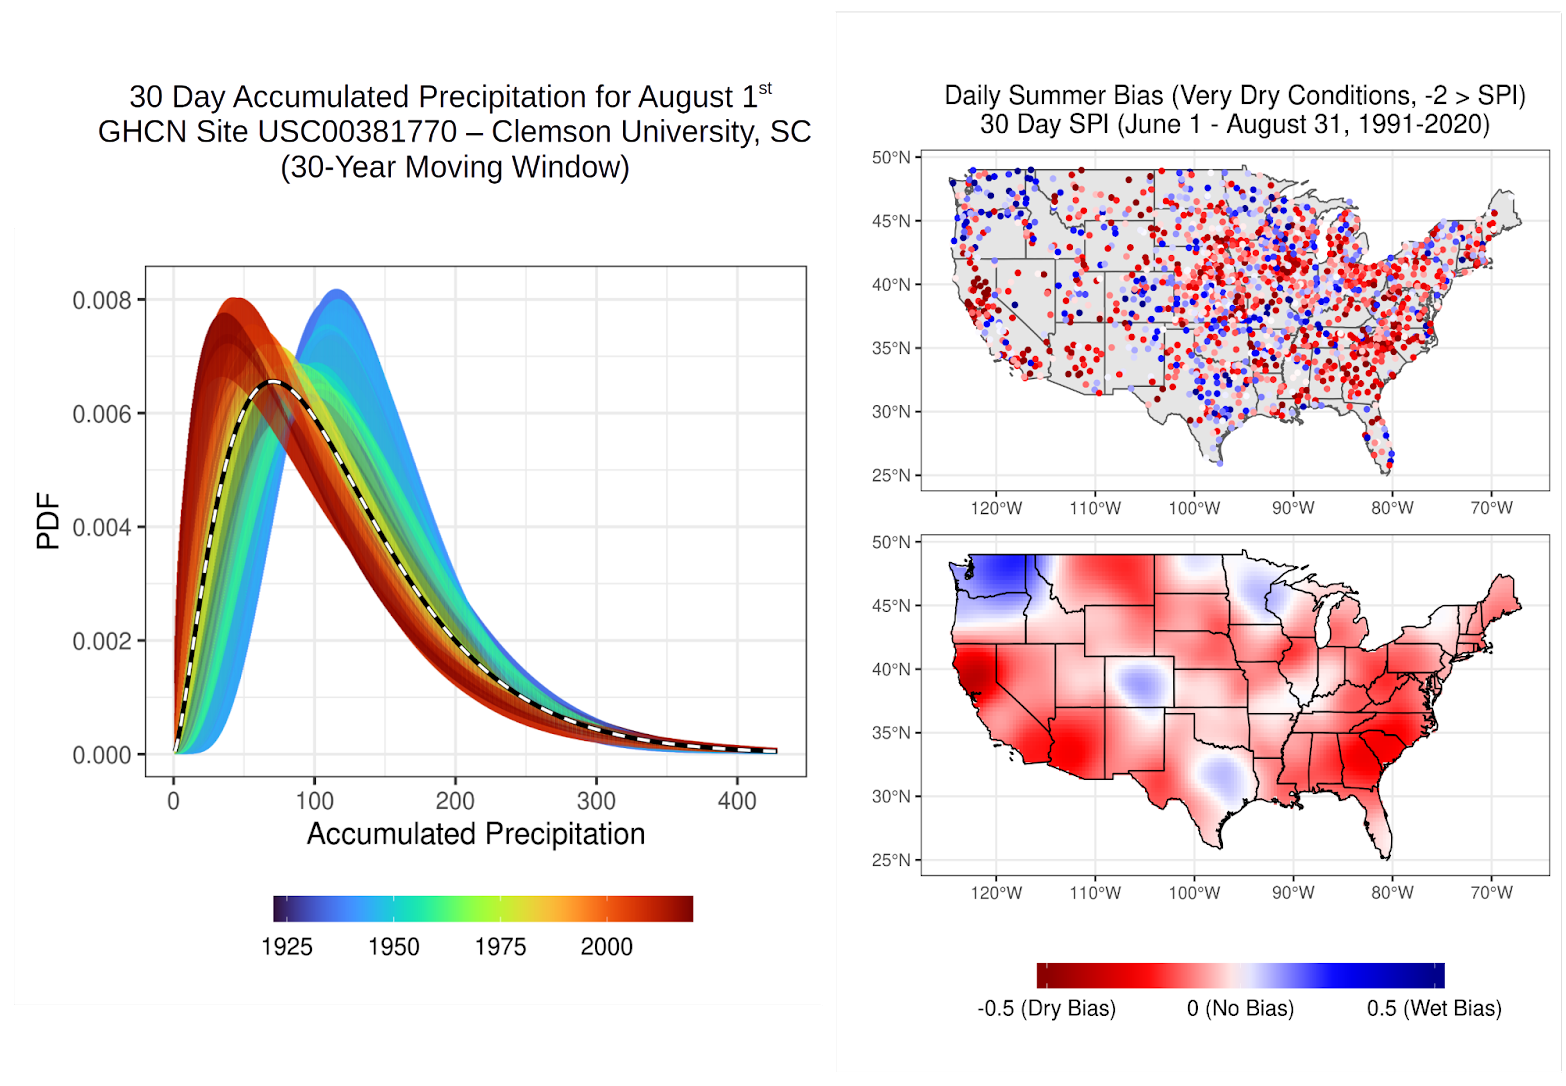 The study found that longer reference periods resulted in a dry bias in regions where aridification is occurring (like the Southwest) and a wet bias in regions that are becoming wetter (like the Northwest).